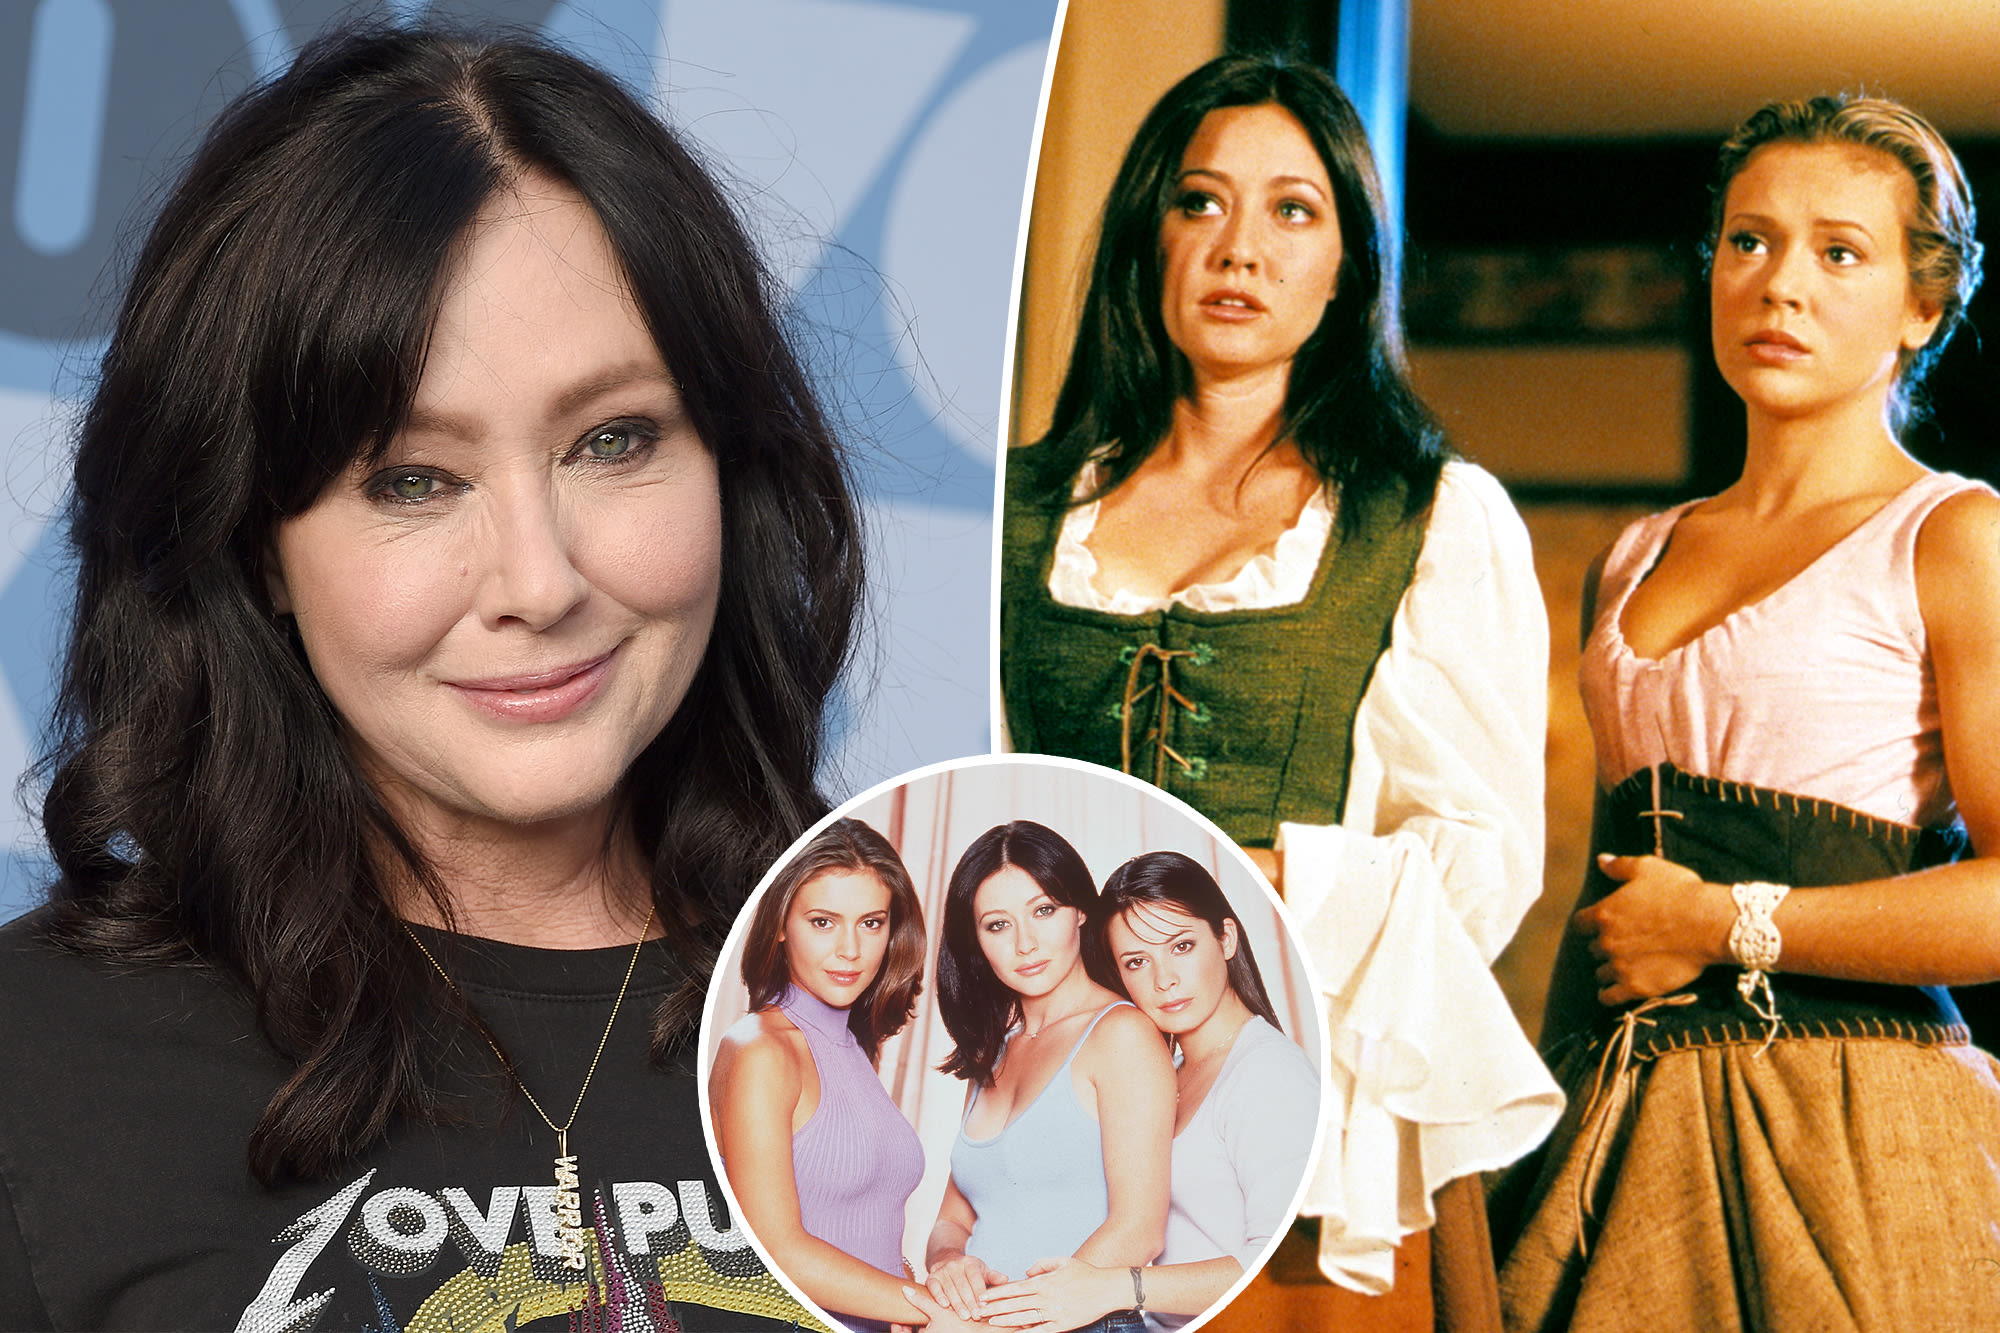 Alyssa Milano breaks her silence on Shannen Doherty’s death at 53 after ‘Charmed’ feud